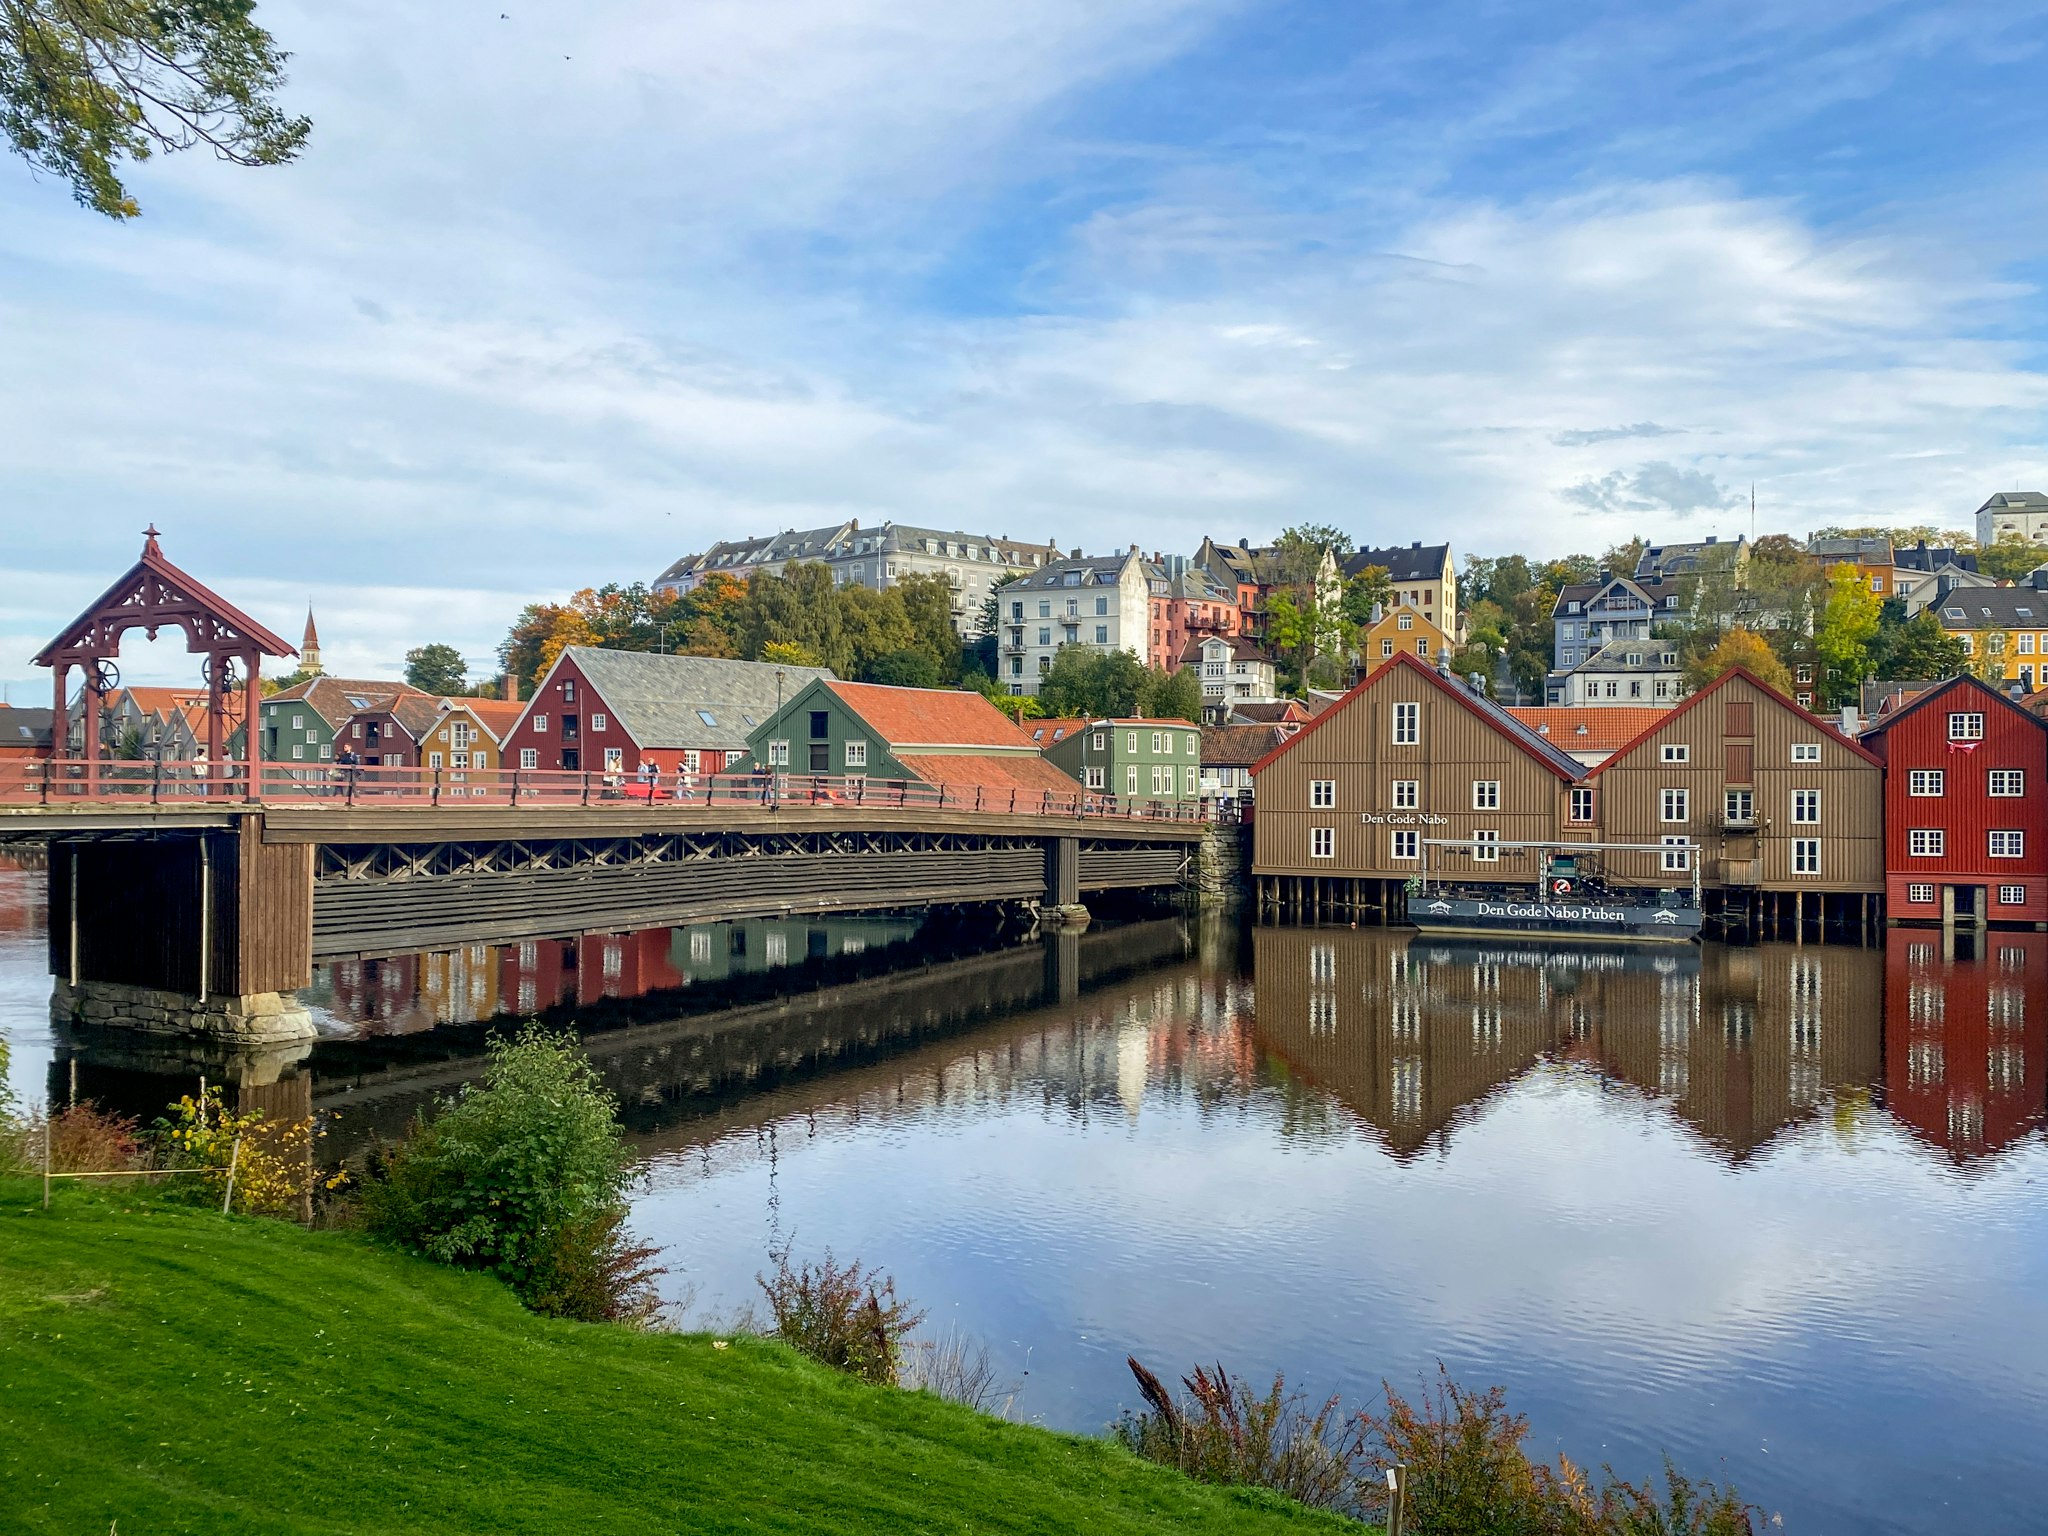 The-final-stop-of-Norways-longest-train-journey-from-Bod-is-the-colourful-city-of-Trondheim--Daniel-James-Clarke-1.jpg